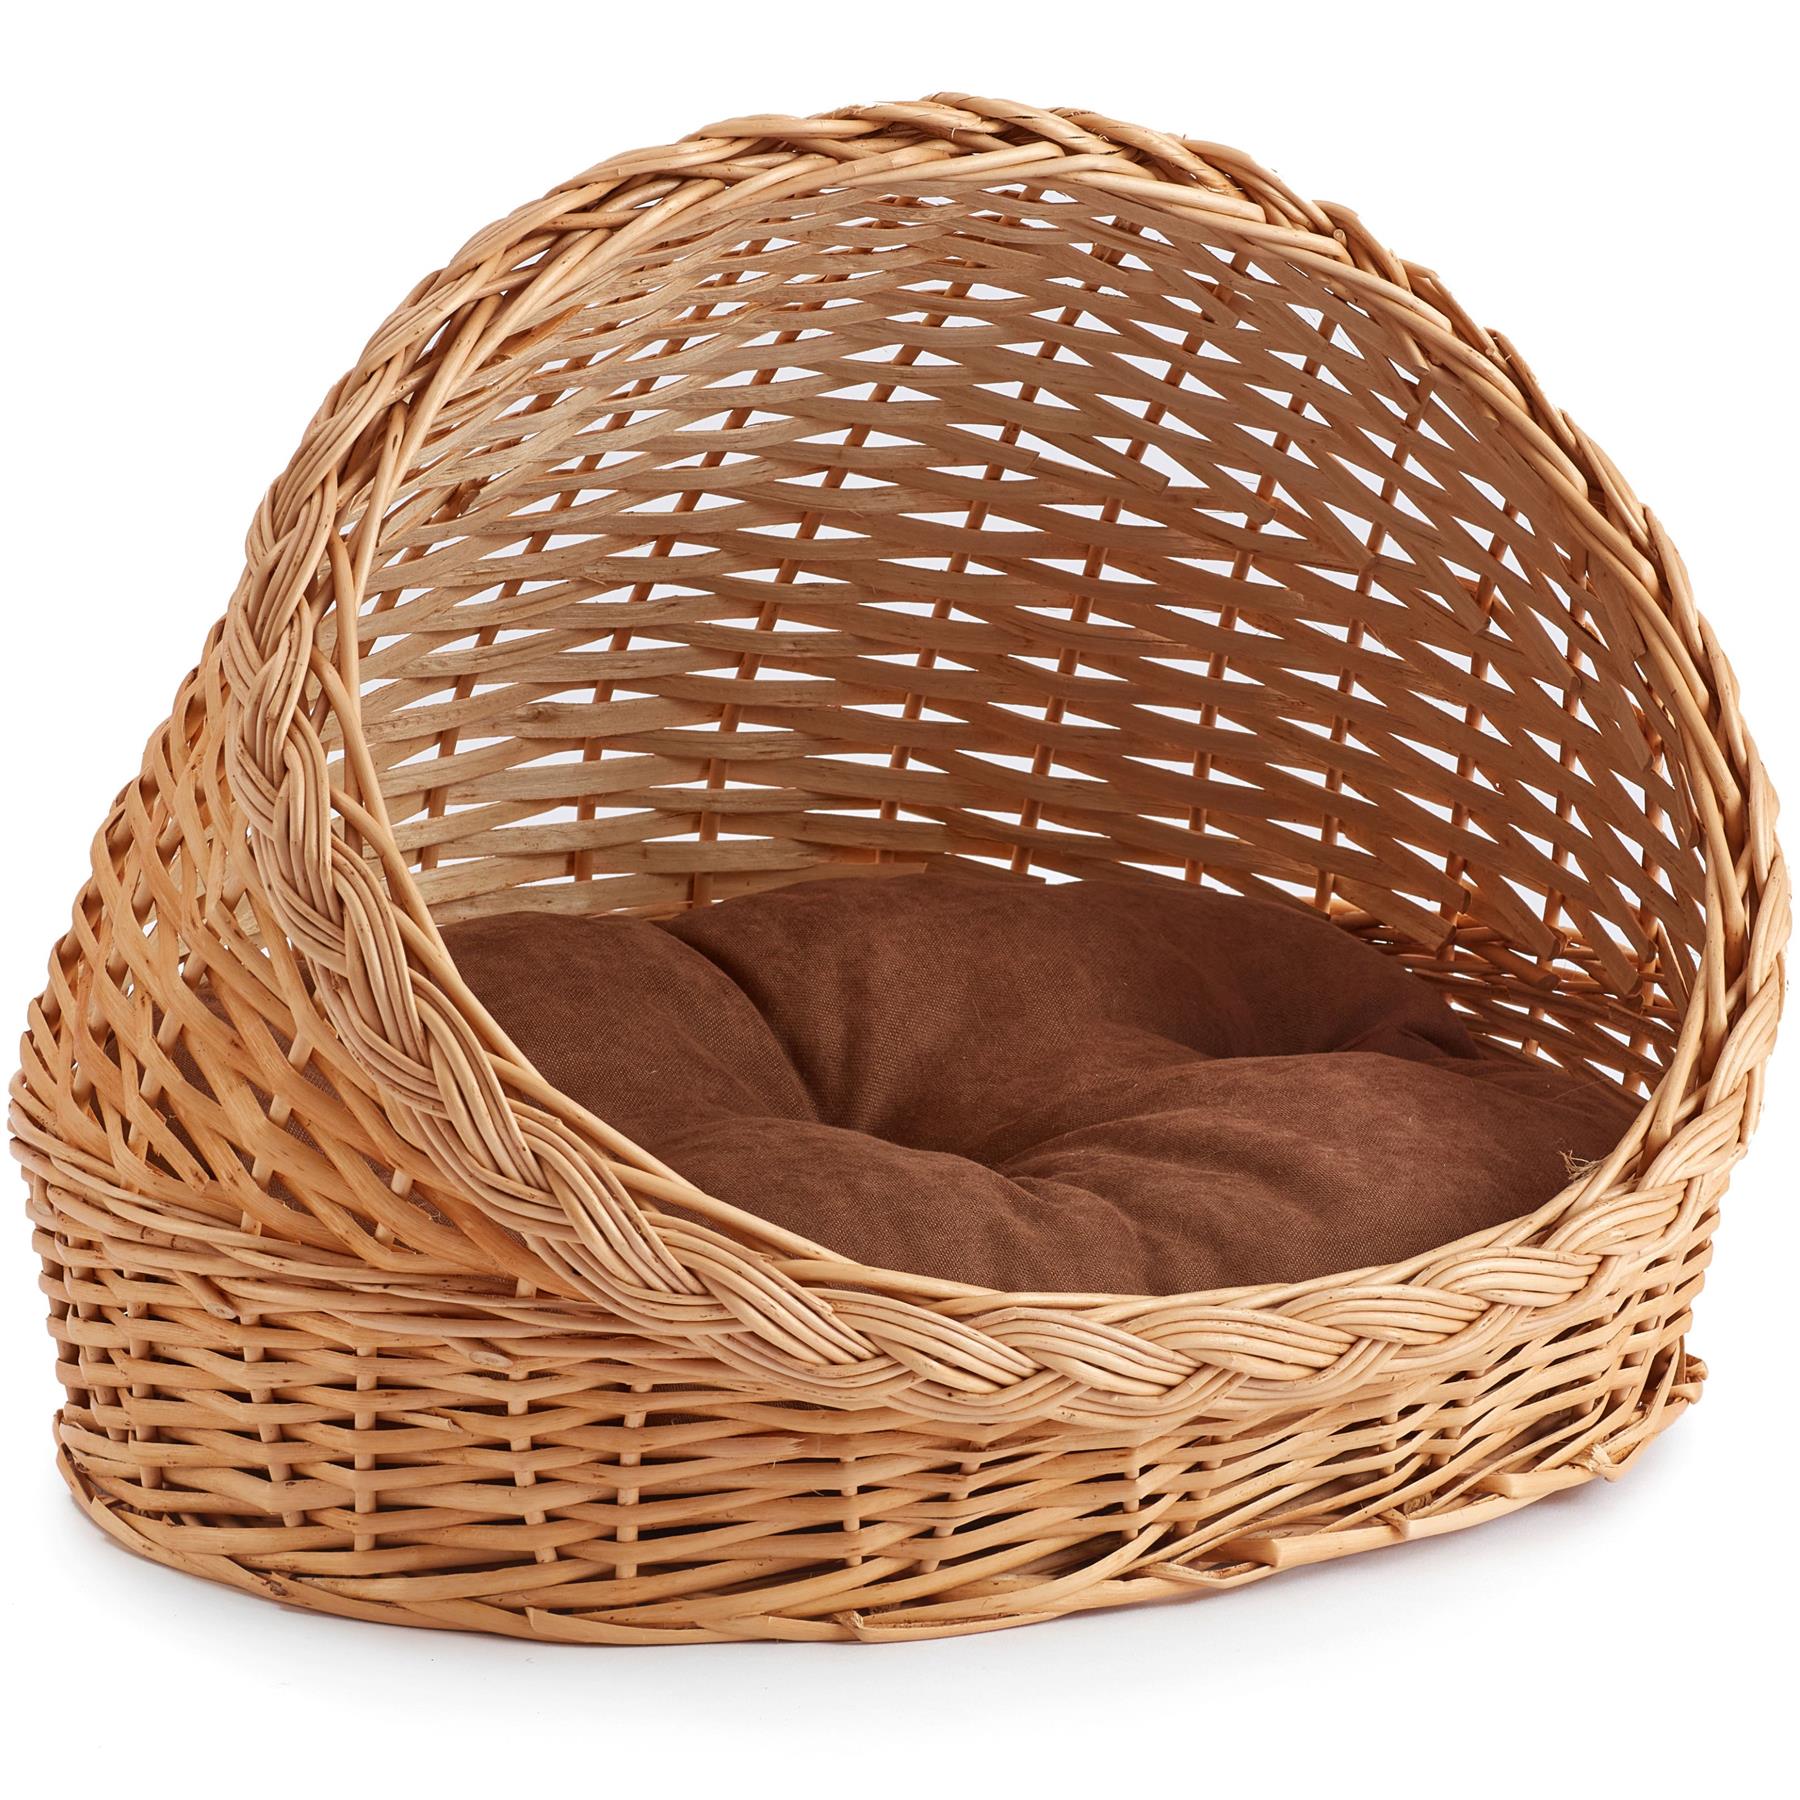 Wicker Cat Basket, Wicker Dog Bed With Removable Cushion, Handmade Round Basket 22.8'' (58cm) Wide, Natural Rattan Pet Sofa for Small-Sized Dog